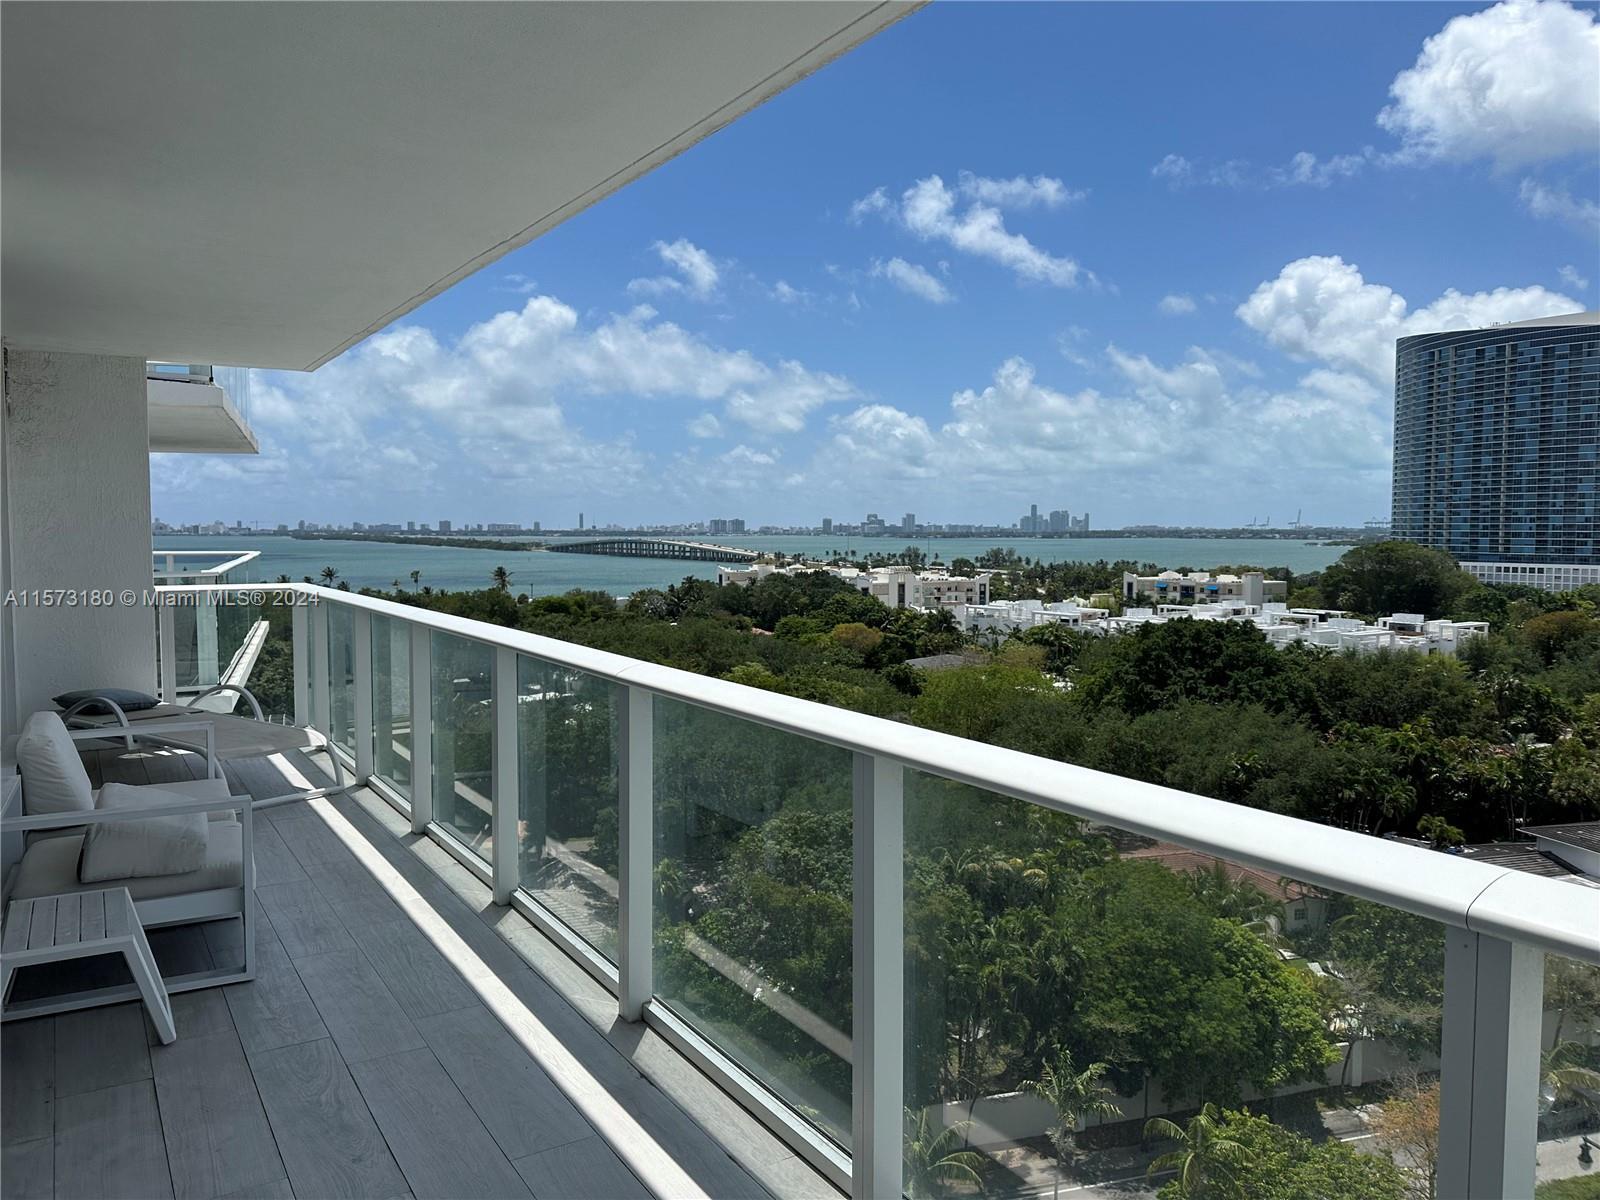 This exquisite unit boasts 2 bedrooms and 2 bathrooms + Den, complemented by breathtaking water view